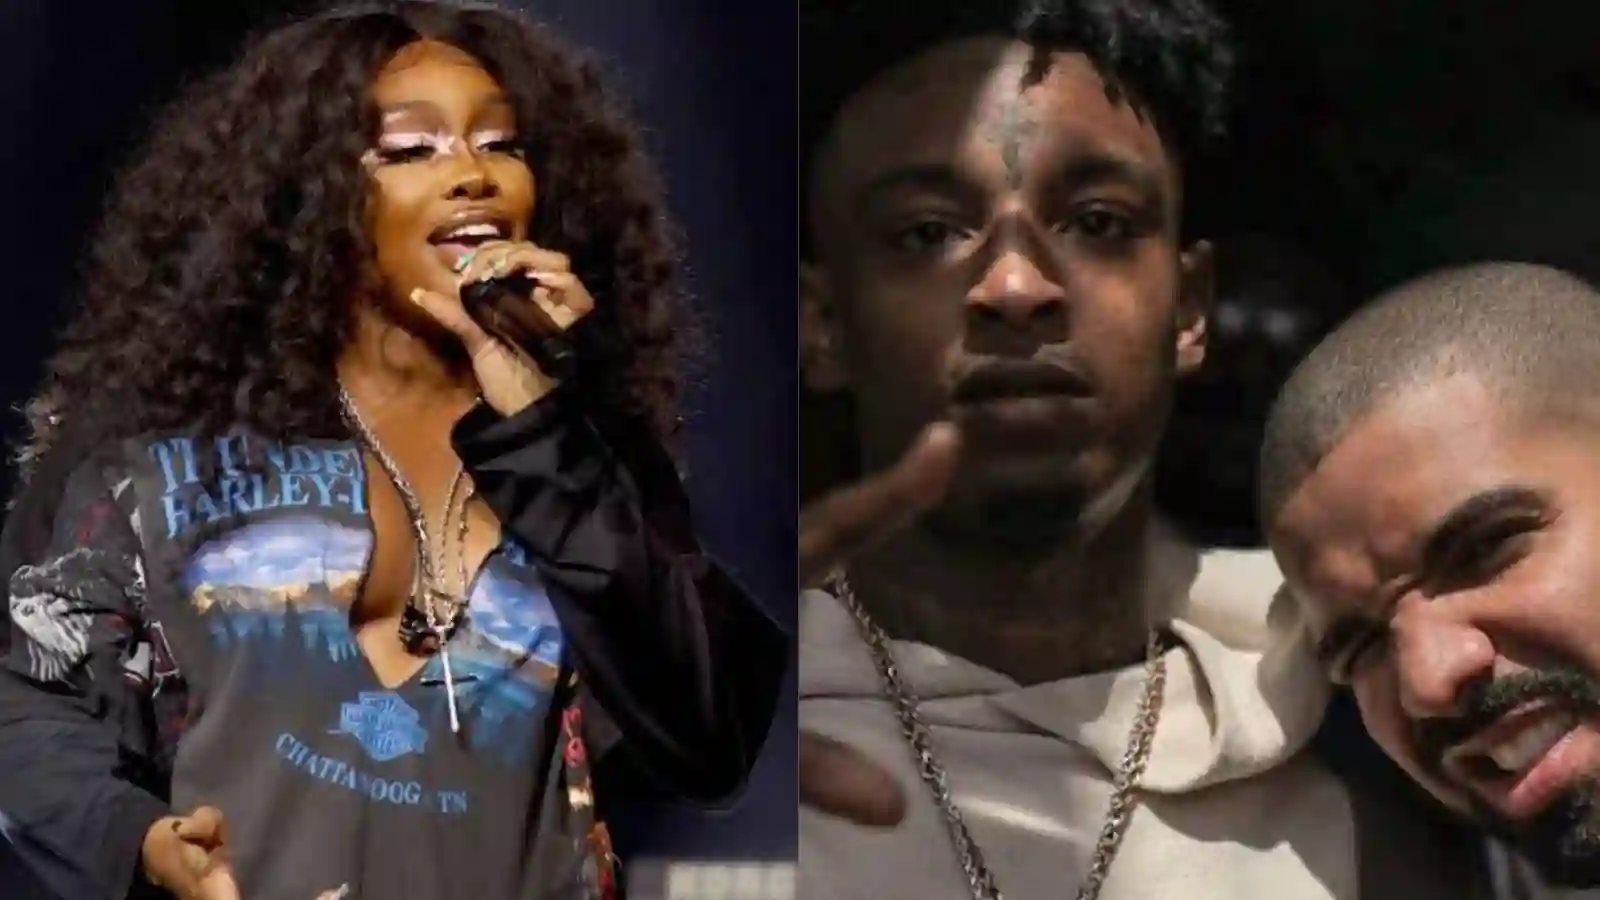 Drake referenced SZA in one of the songs with 21 Savage